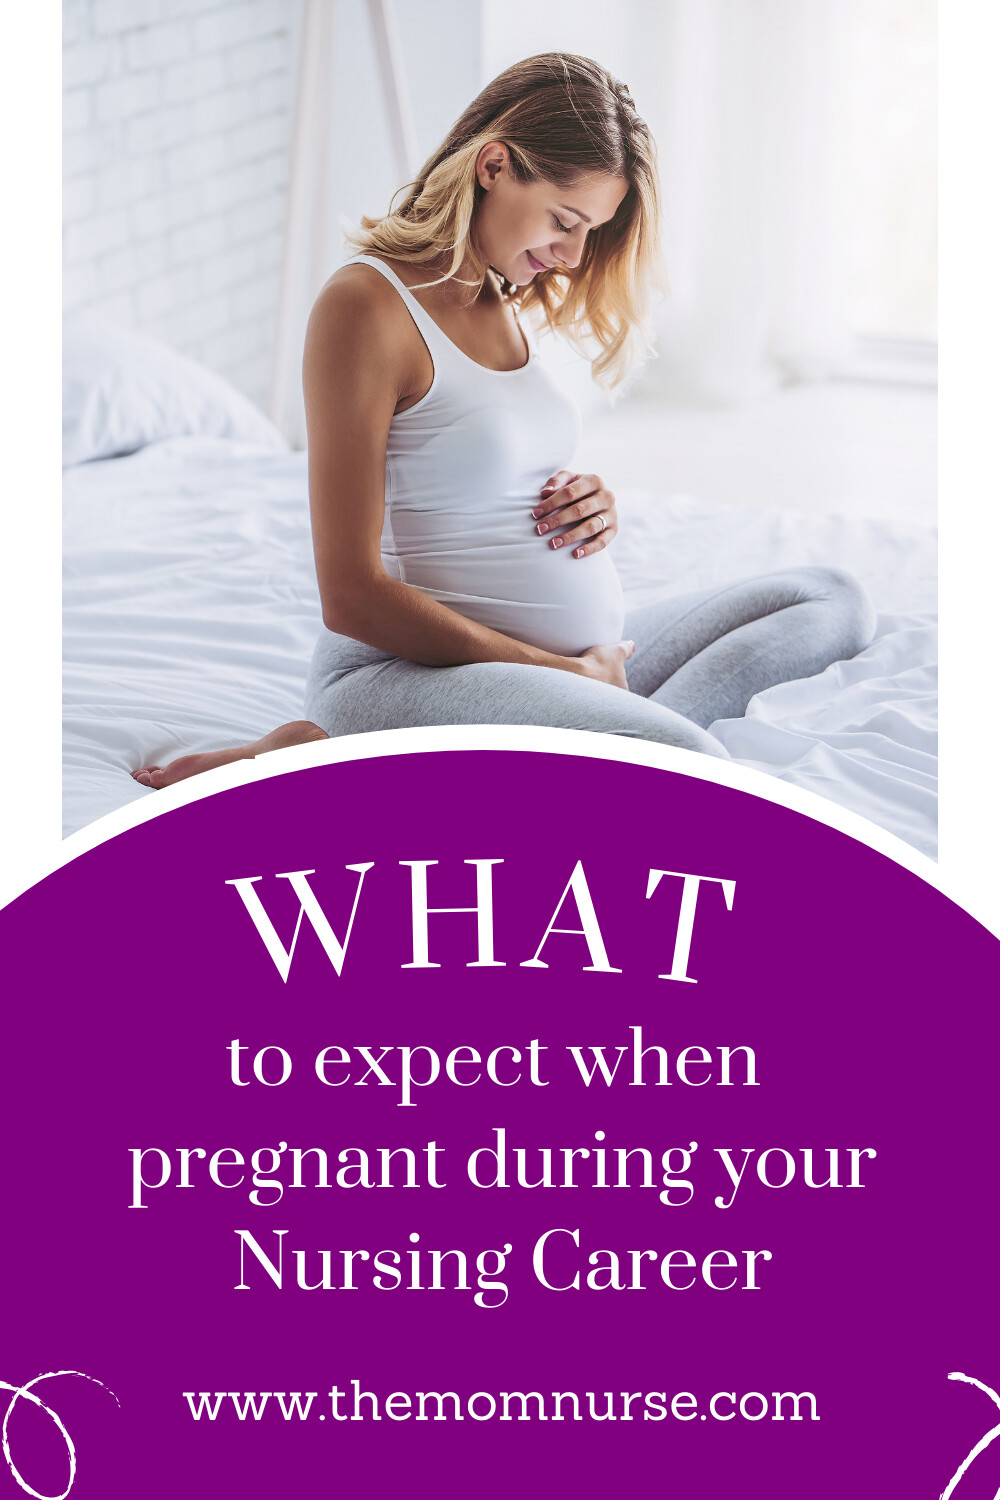 Nursing Job and Pregnancy... What You Should Expect When Working as a Nurse and Expecting a Baby